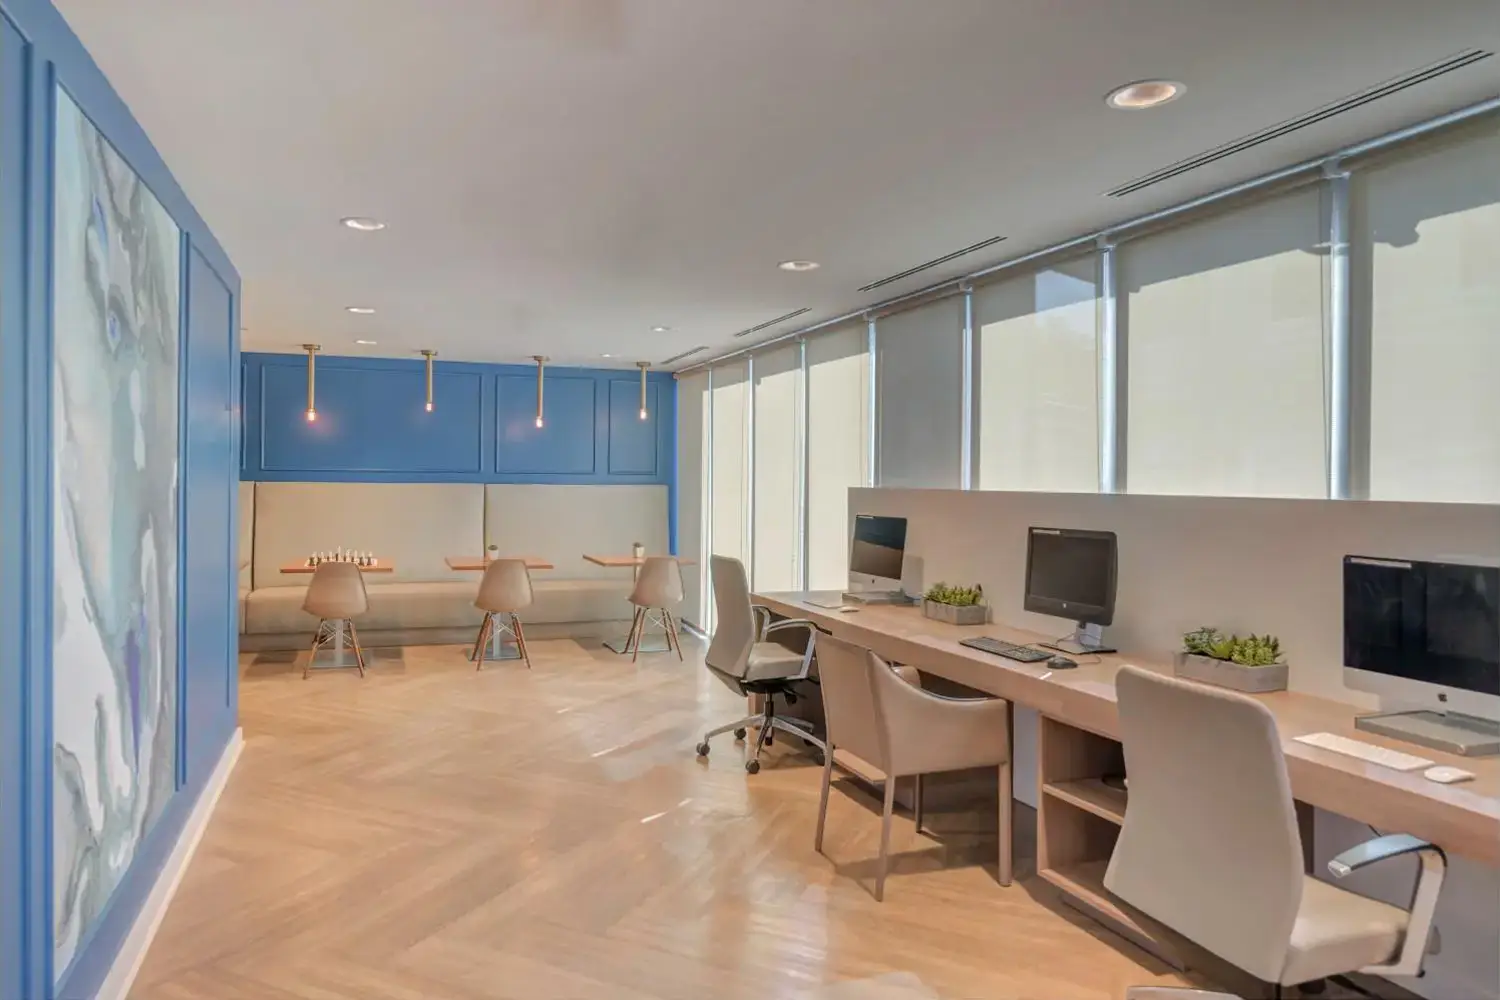 Modern office space with a blue accent wall, wooden floor, white desks with computers, gray chairs, and small potted plants.